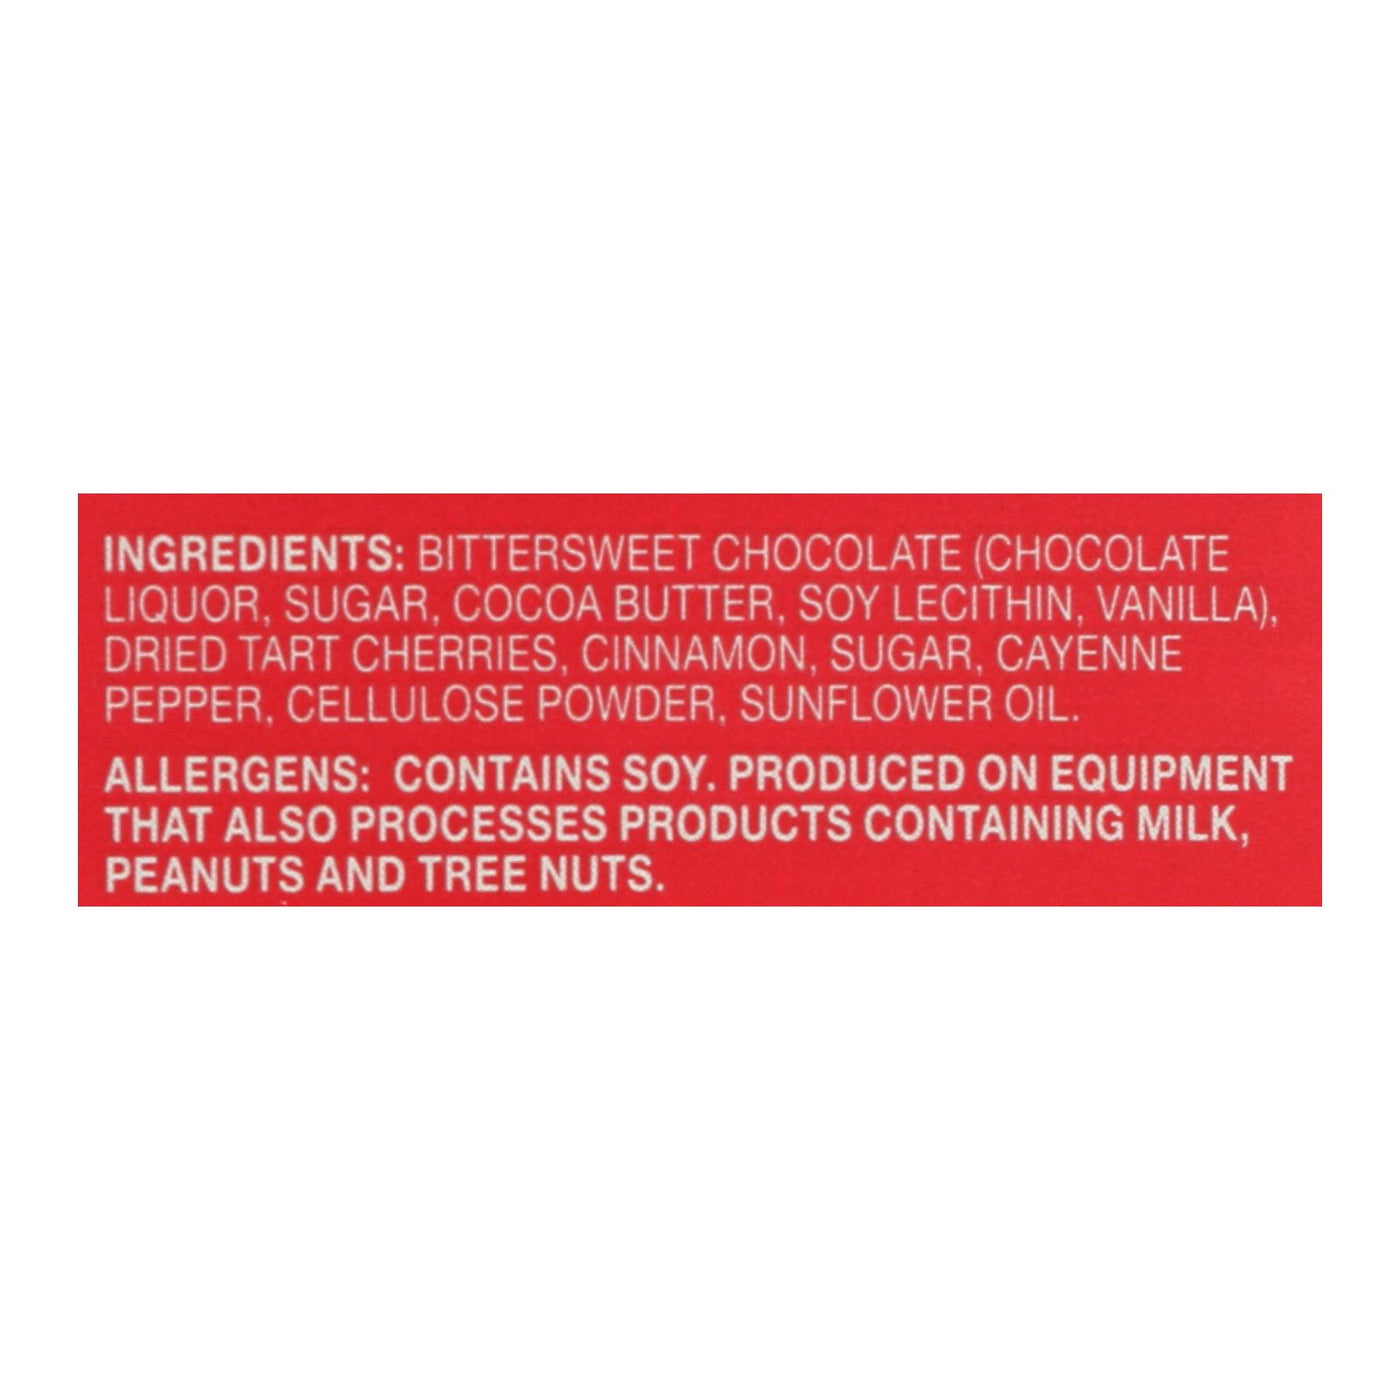 Endangered Species Natural Chocolate Bars - Dark Chocolate - 60 Percent Cocoa - Cinnamon Cayenne And Cherries - 3 Oz Bars - Case Of 12 | OnlyNaturals.us